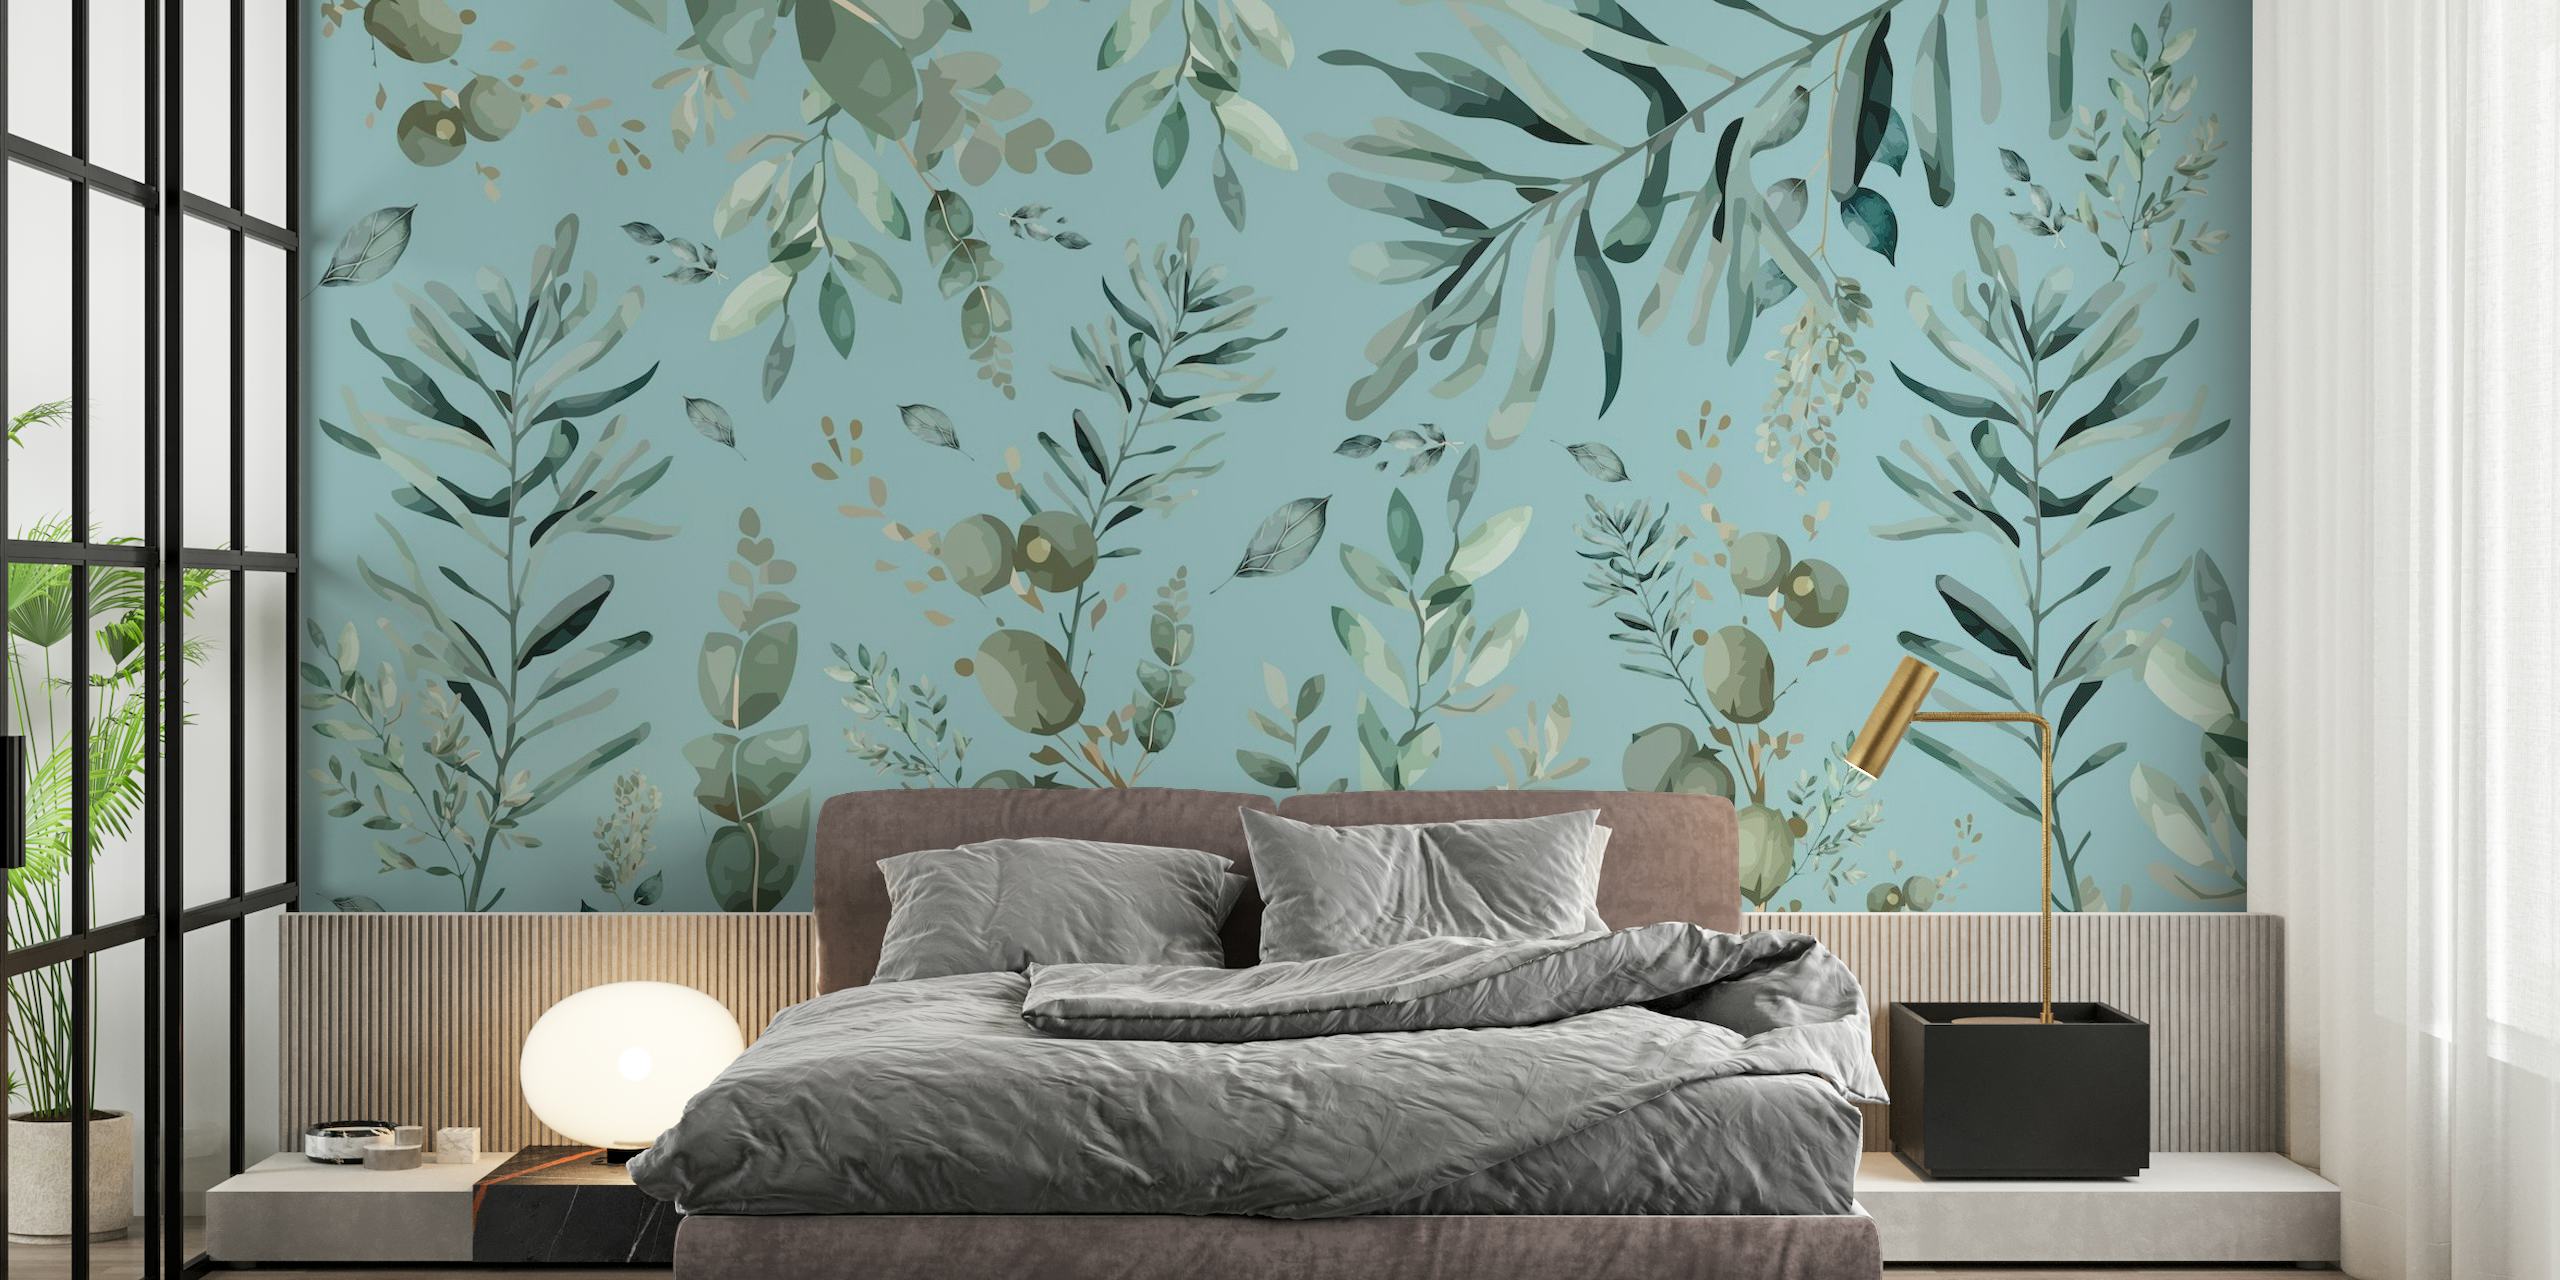 Botanic Leafs Blue wall mural with golden botanical print on a tranquil blue background